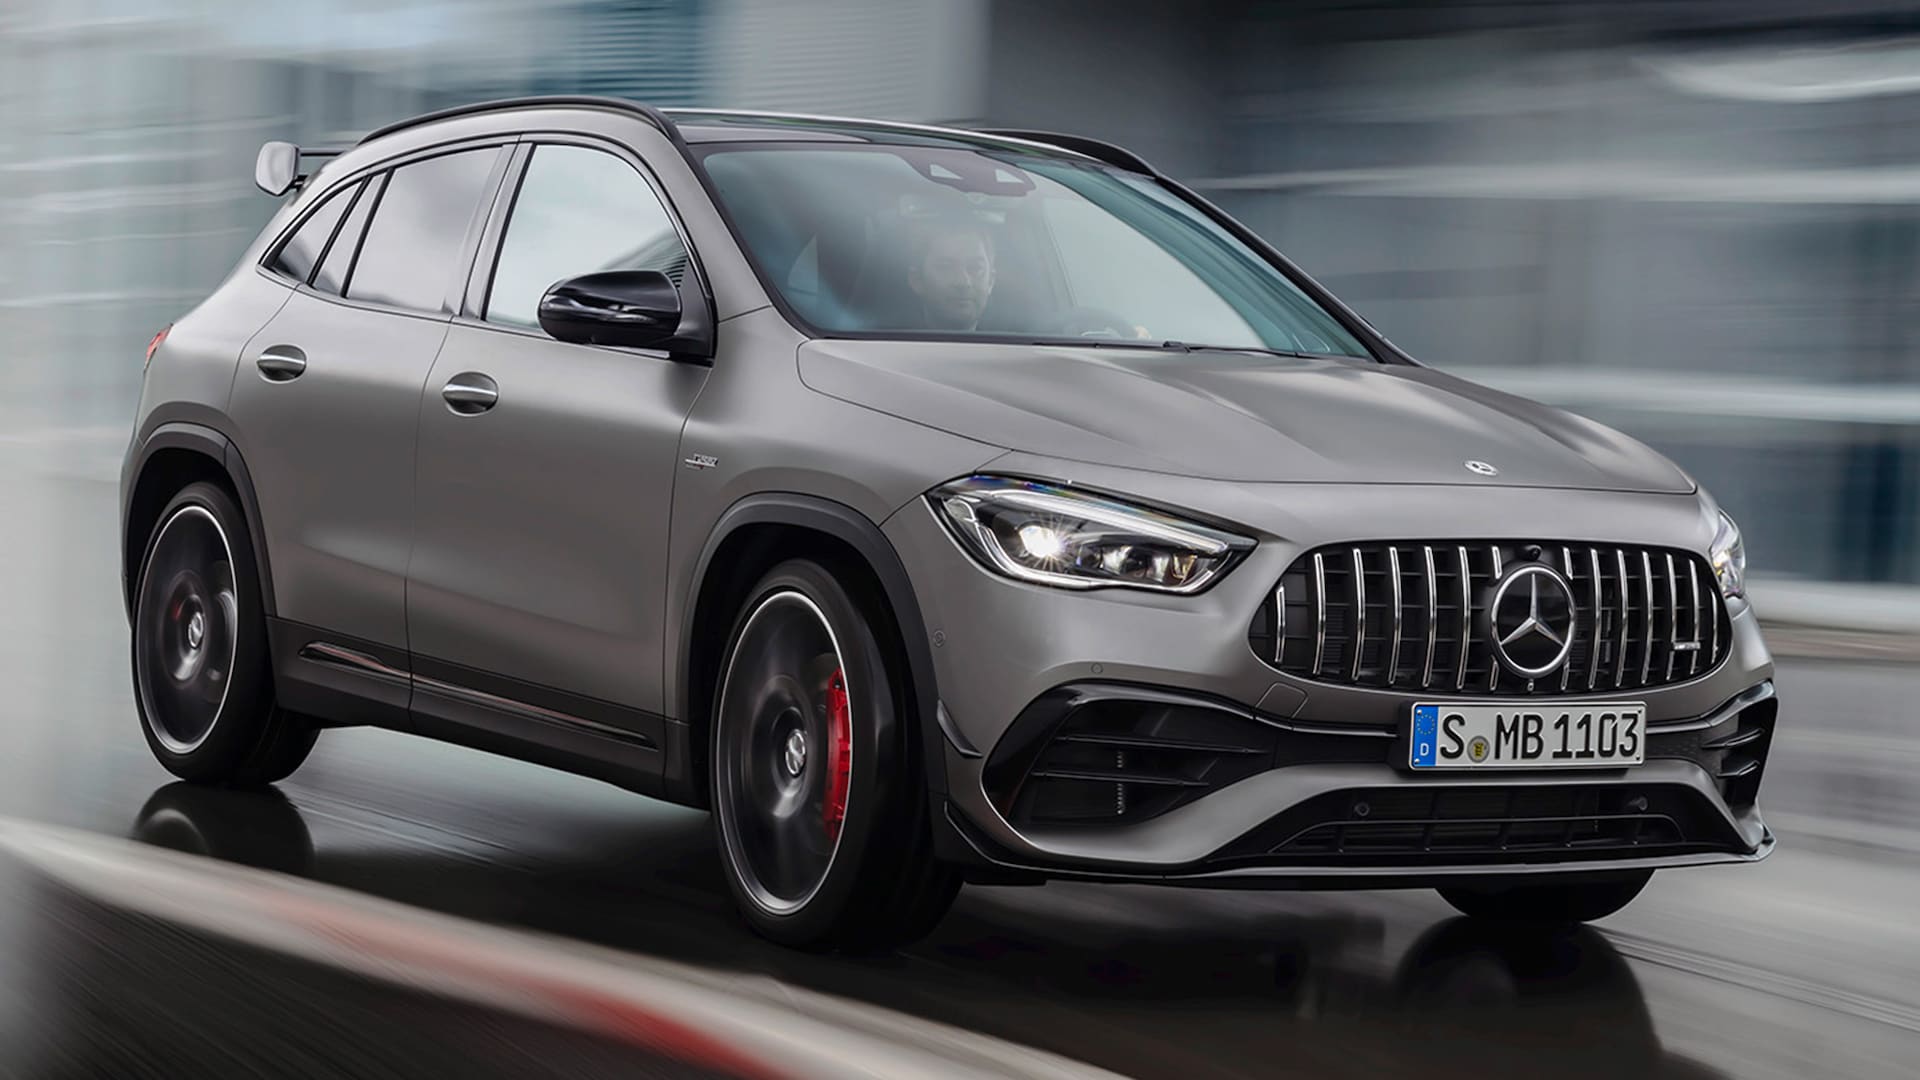 The 2021 Mercedes-AMG GLA 45 Remains Small, Ridiculously Powerful